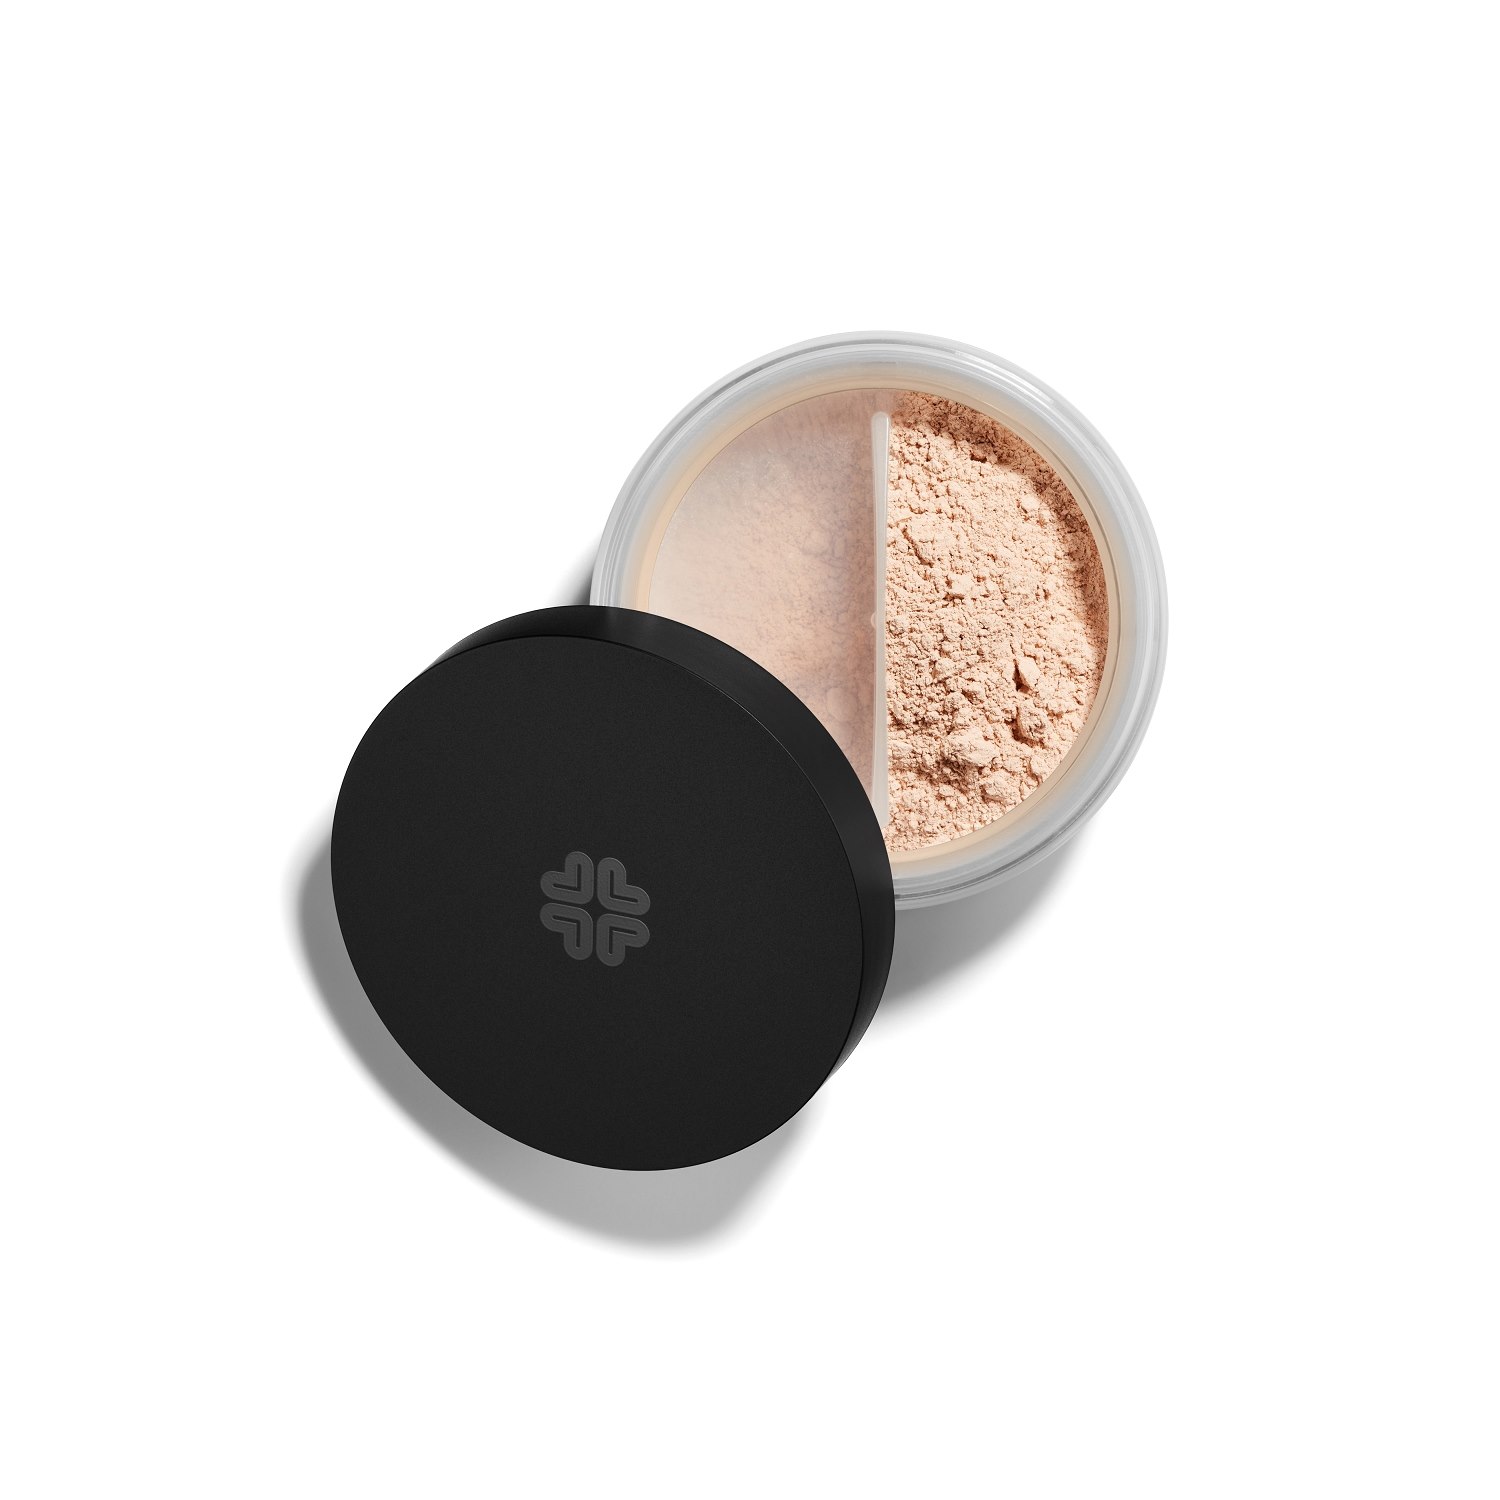 Lily Lolo Mineral Foundation SPF 15, 10 g Blondie